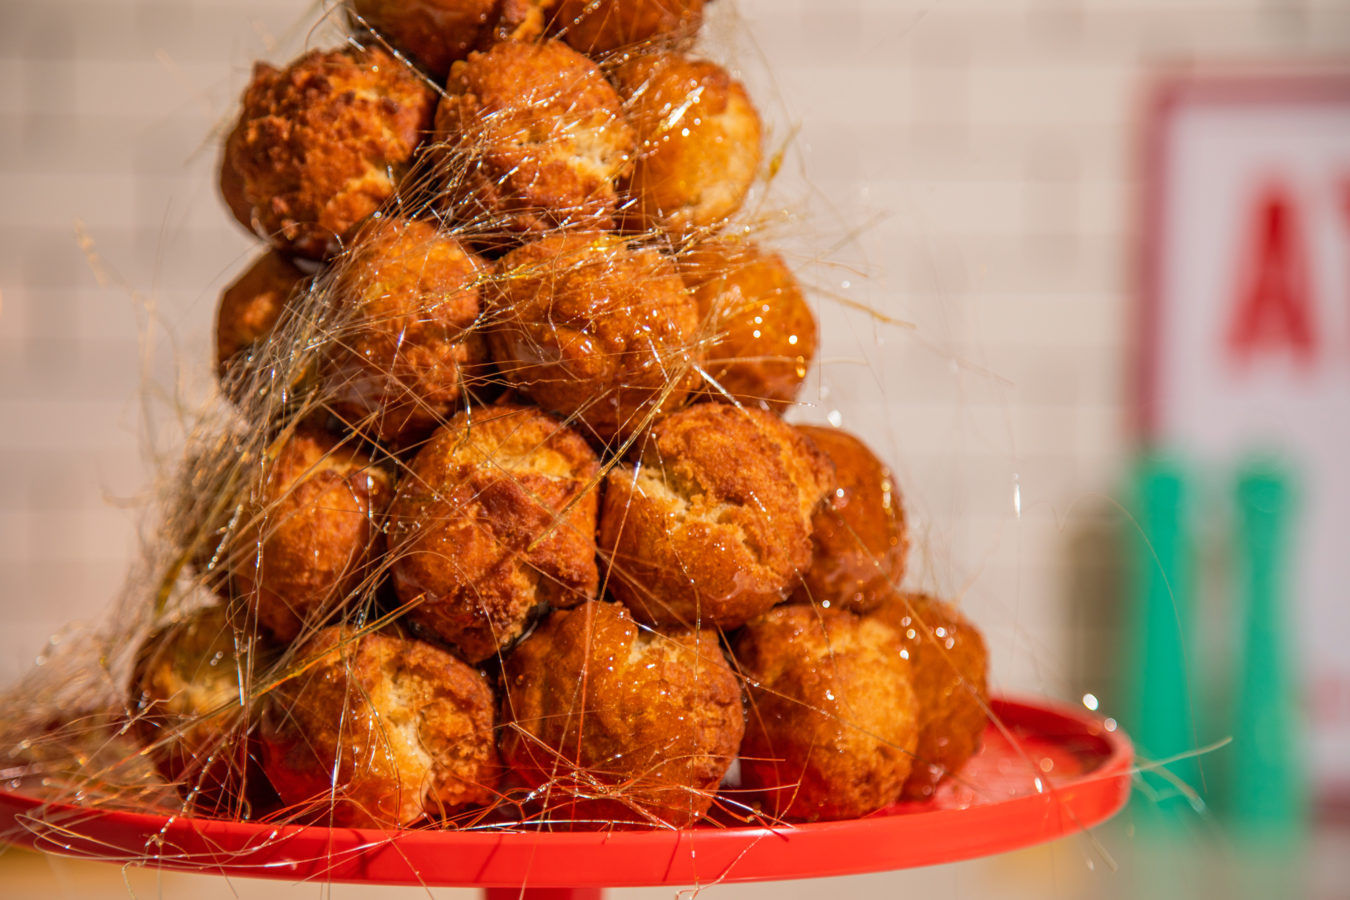 This tower of doughnuts is the perfect centrepiece for your holiday table 